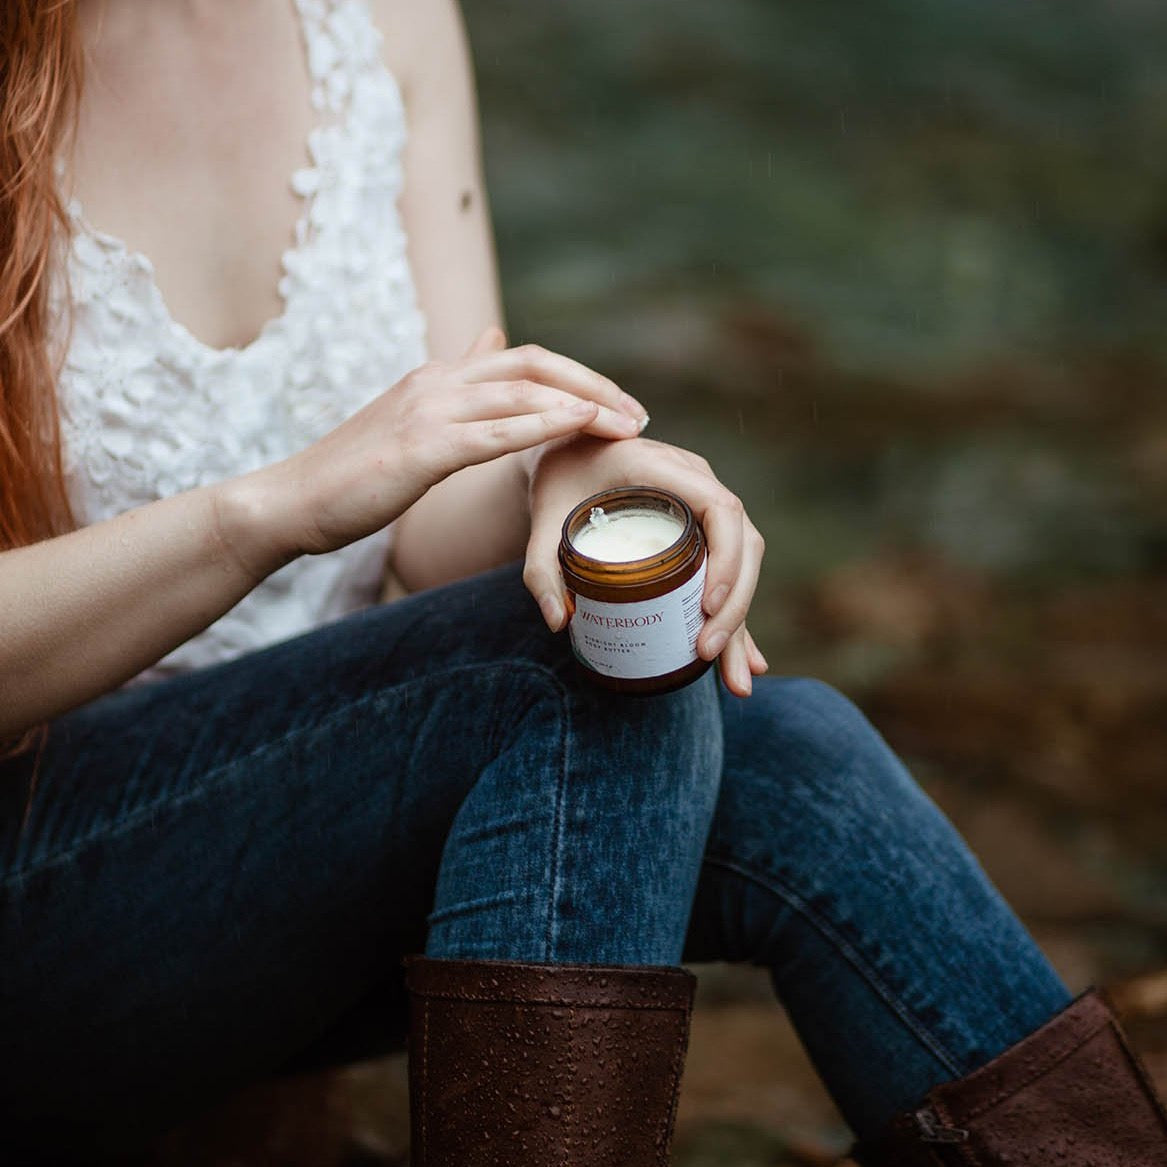 A woman sits beside a stream in the forest. She is wearing a white lace tank top, blue jeans, and brown boots. She holds a jar of body butter in her hands and lightly applies the product to her skin.